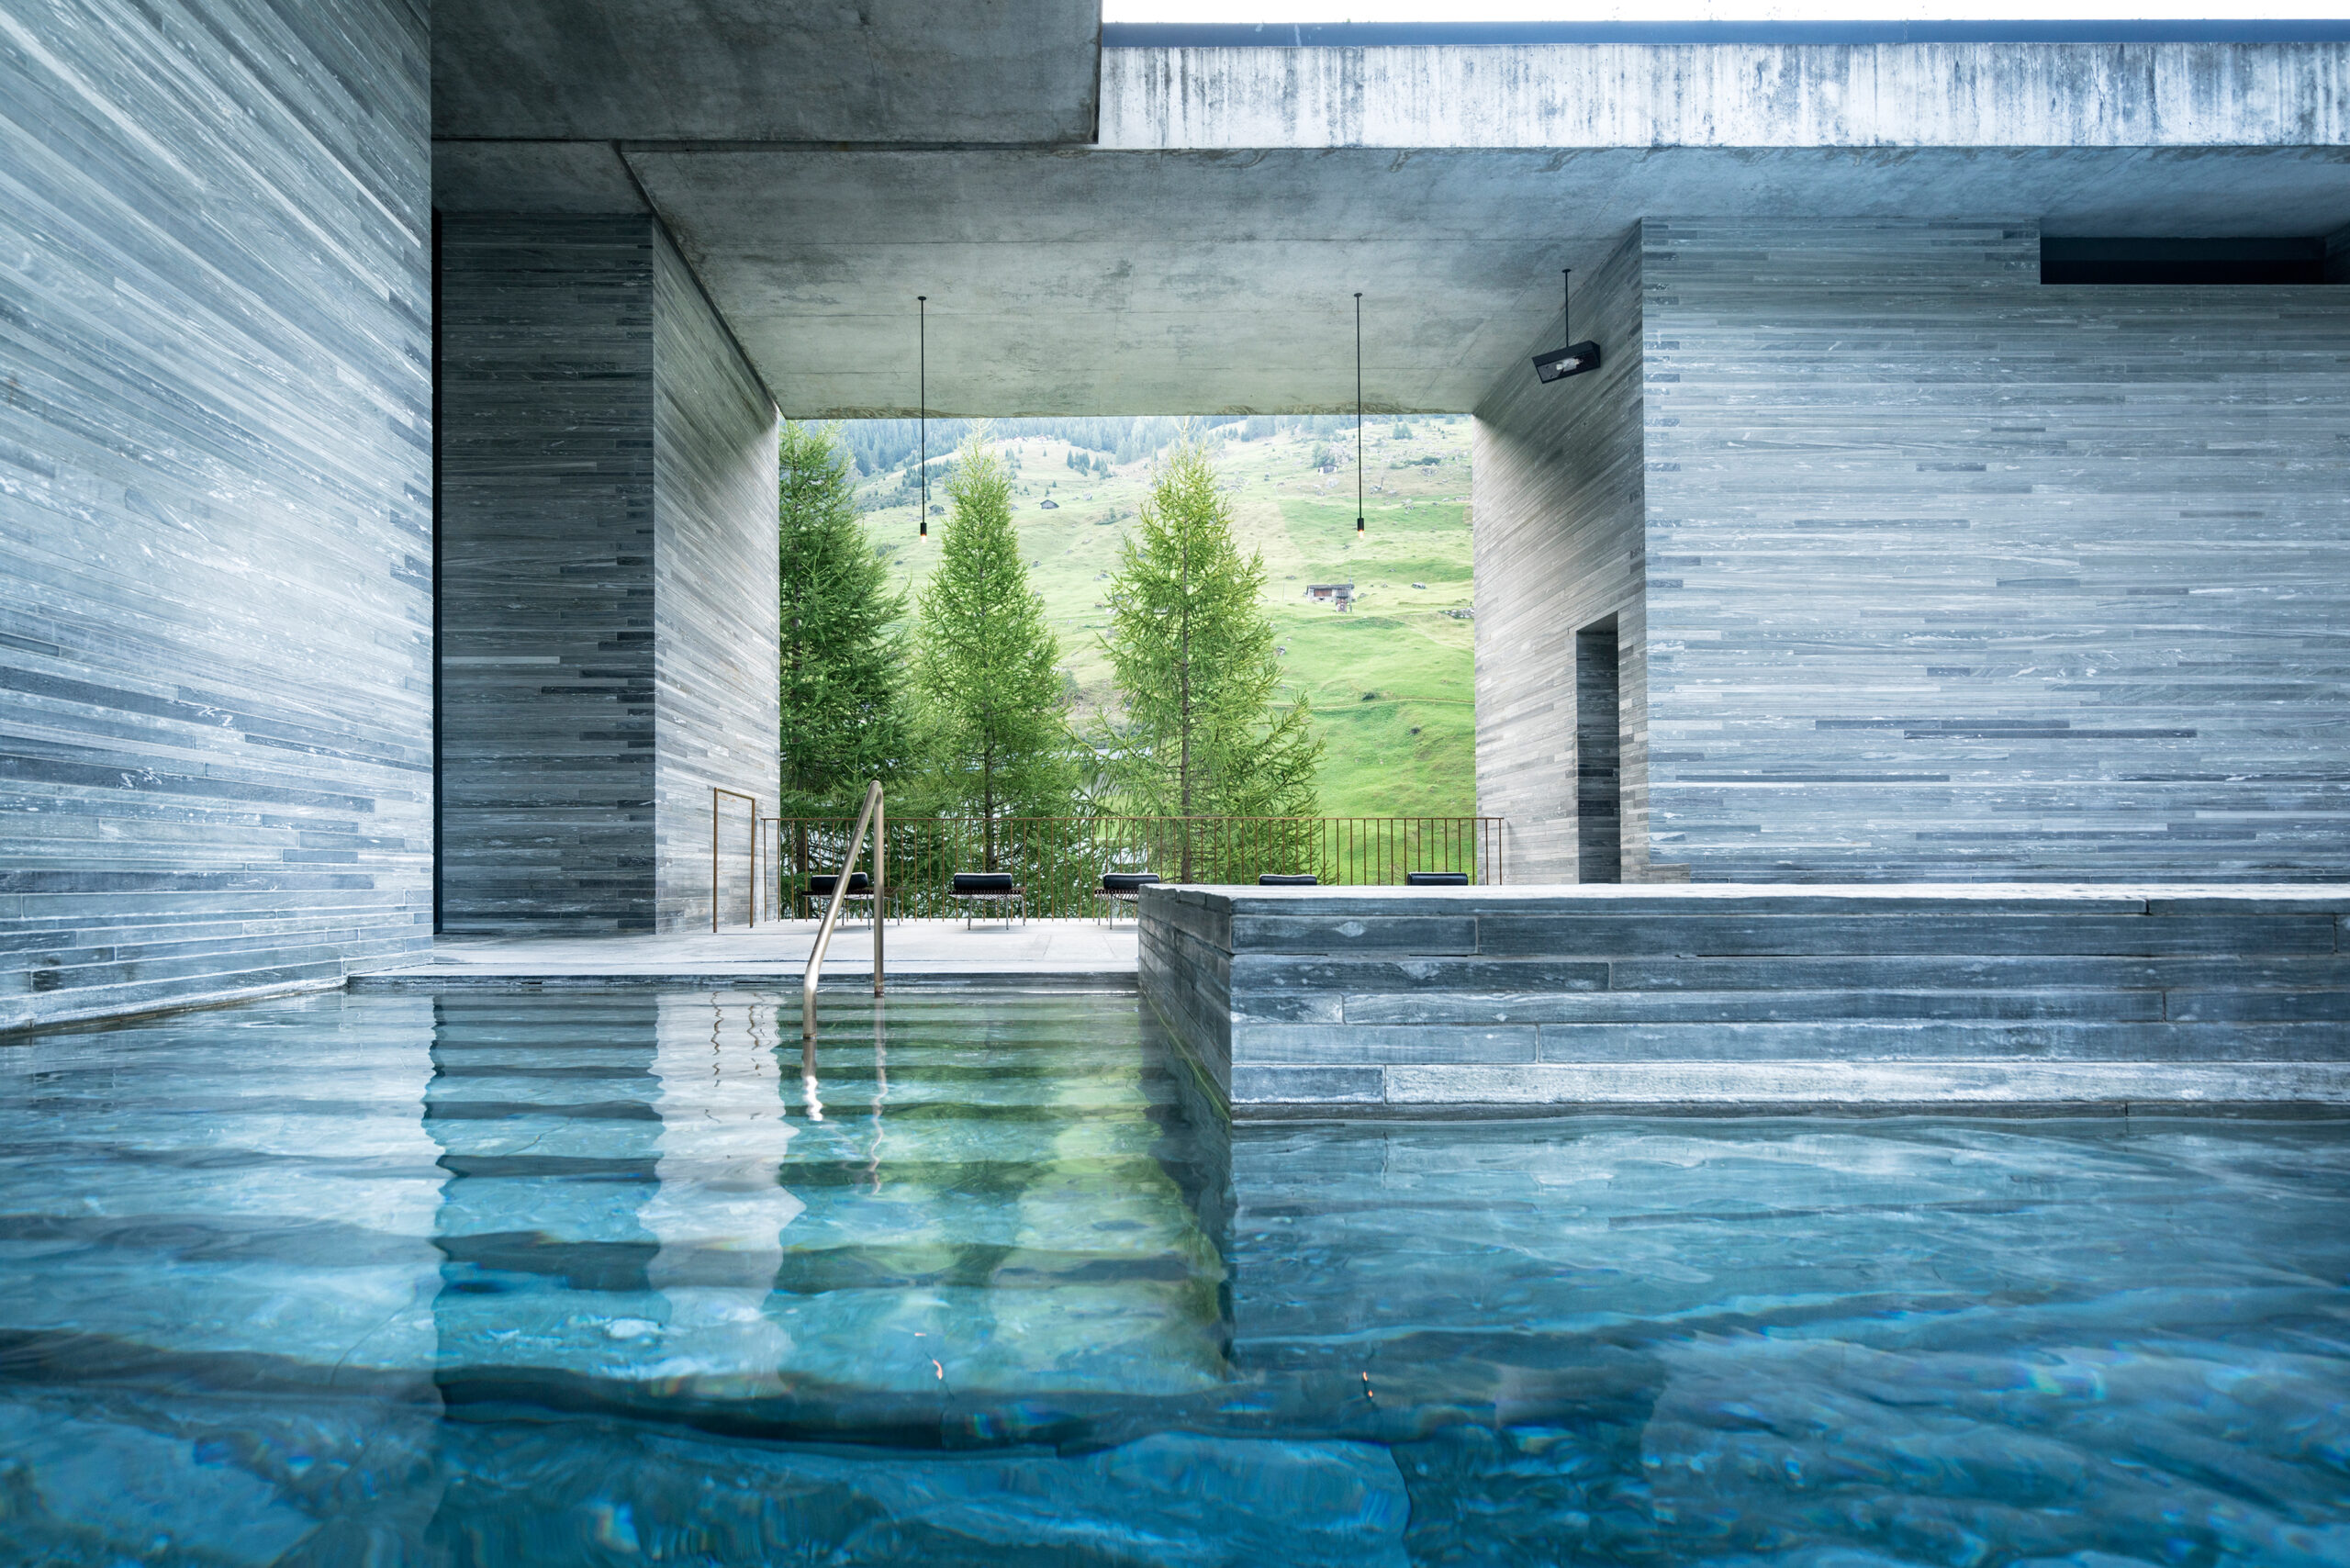 Therme Vals architecture